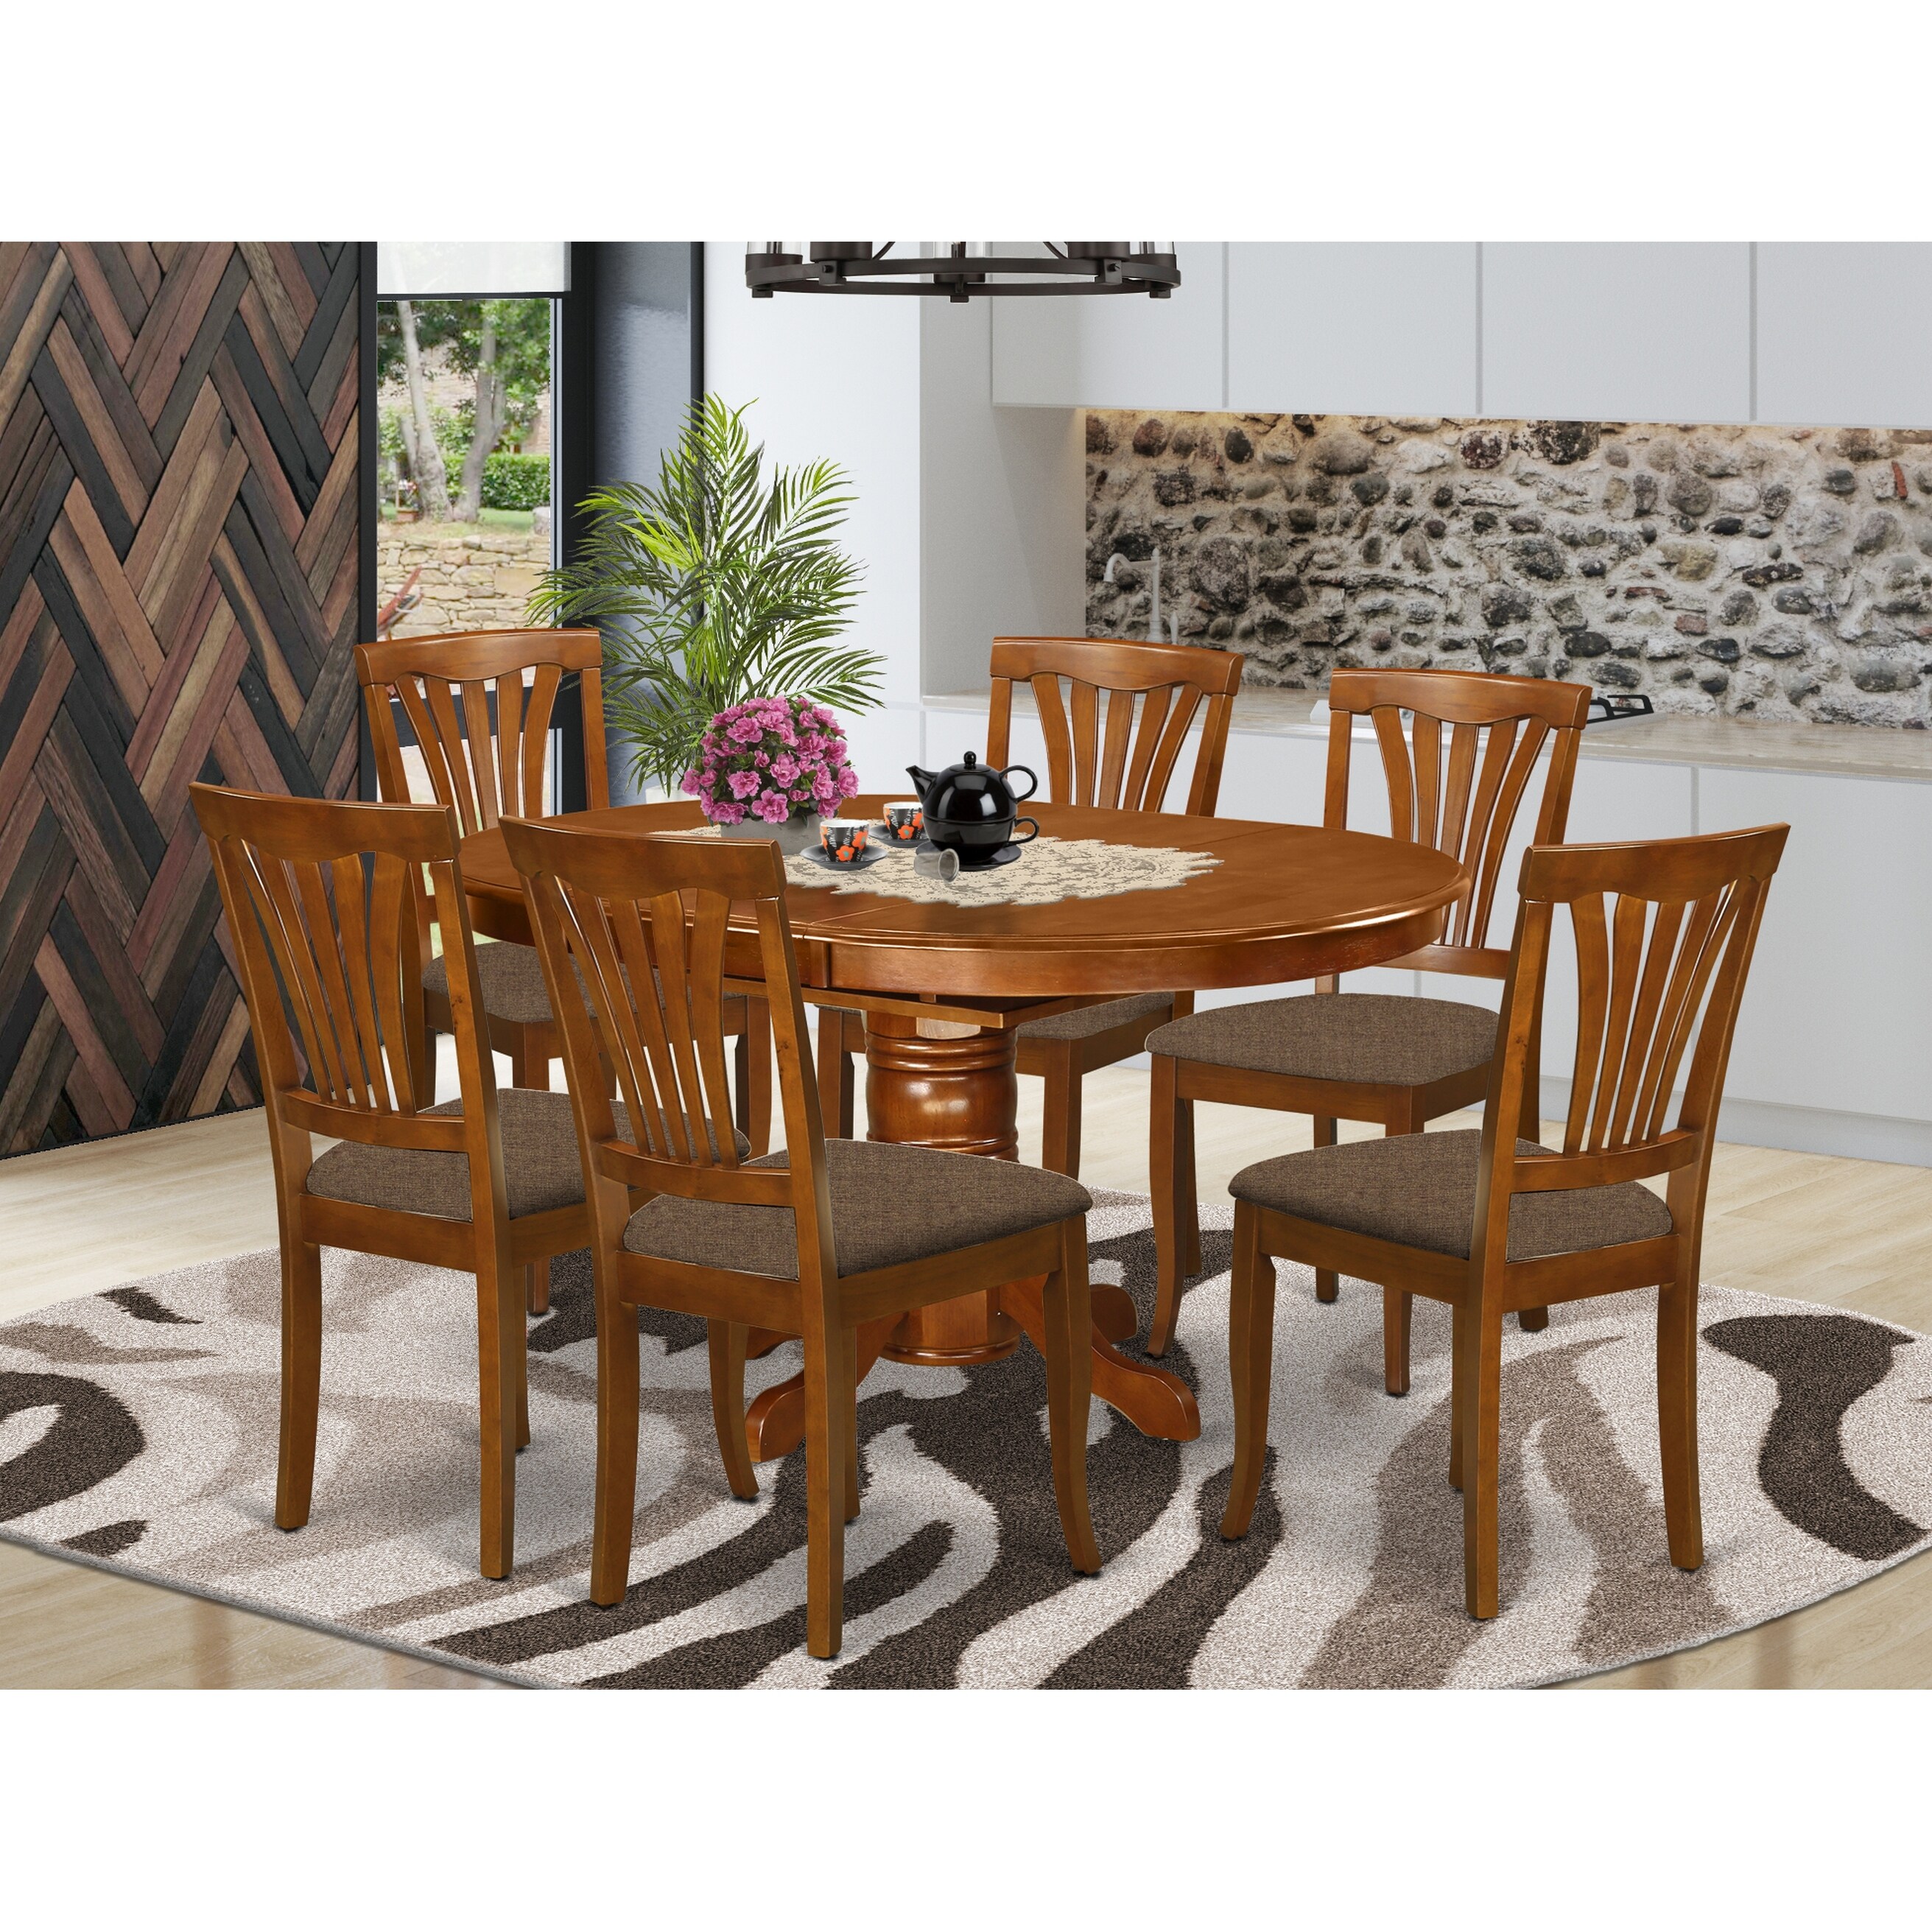 Avon7 Sbr C 7 Piece Dining Set Oval Table With Leaf And 6 Dining Chairs Saddle Brown Finish Pieces Option On Sale Overstock 10296404